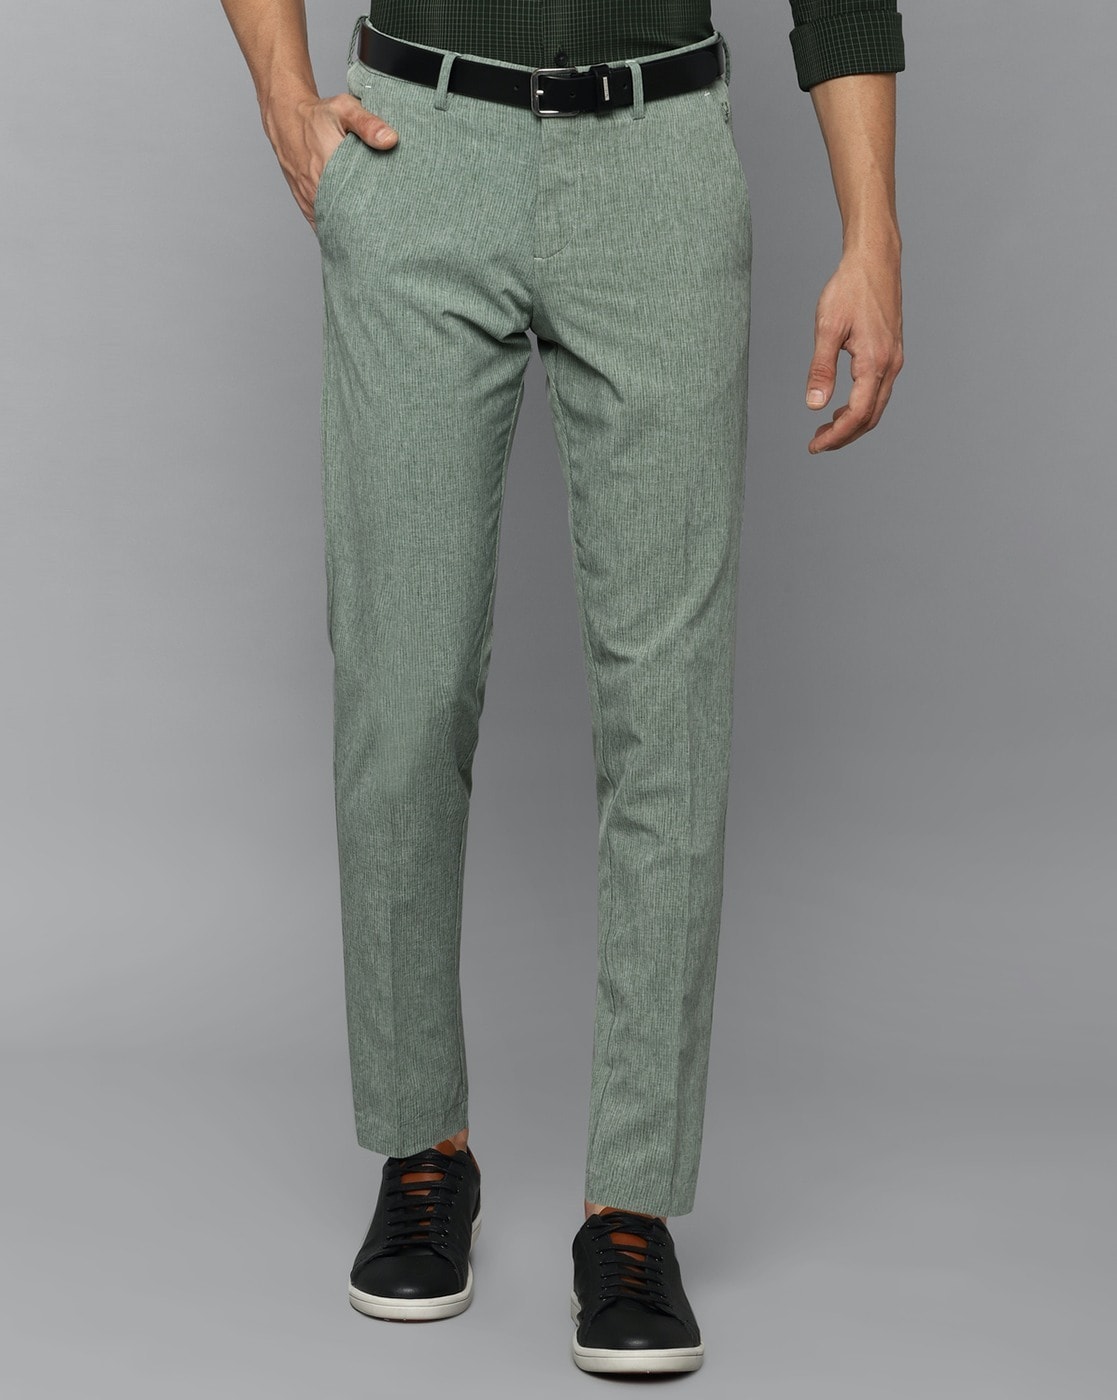 Buy Allen Solly Men Solid Regular Fit Formal Trouser - Cream Online at Low  Prices in India - Paytmmall.com